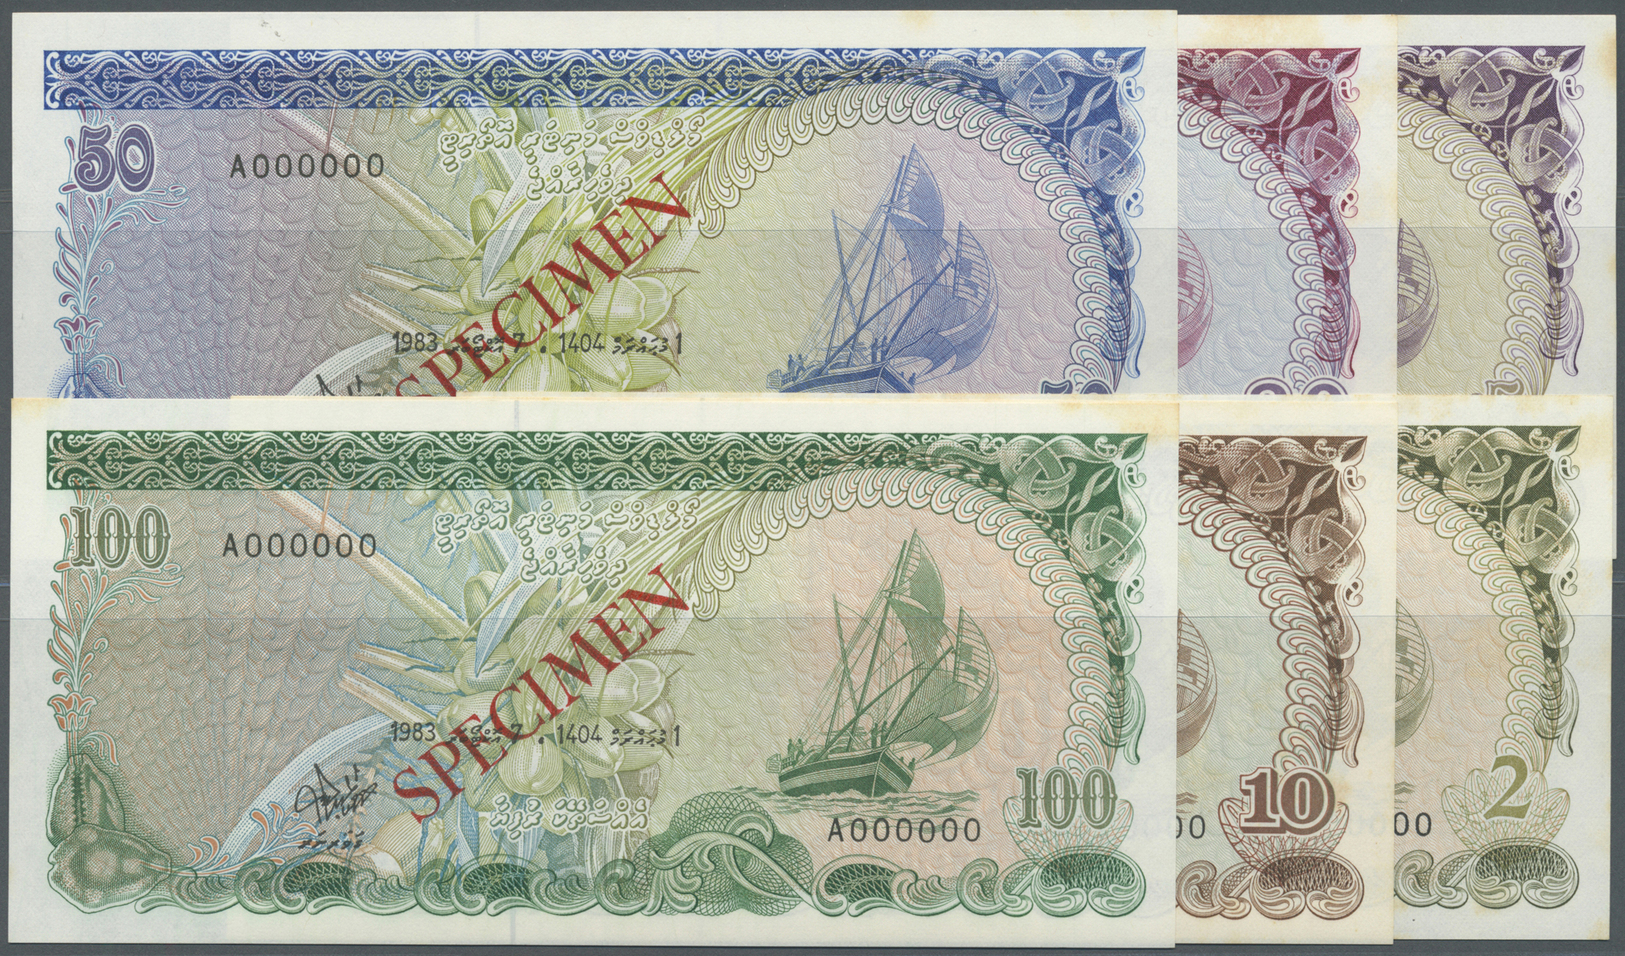 01648 Maldives / Malediven: Set Of 6 Specimen Notes From 2 To 100 Rupees 1983 P. 9s-14s Some With Foxing In Paper But Un - Maldives